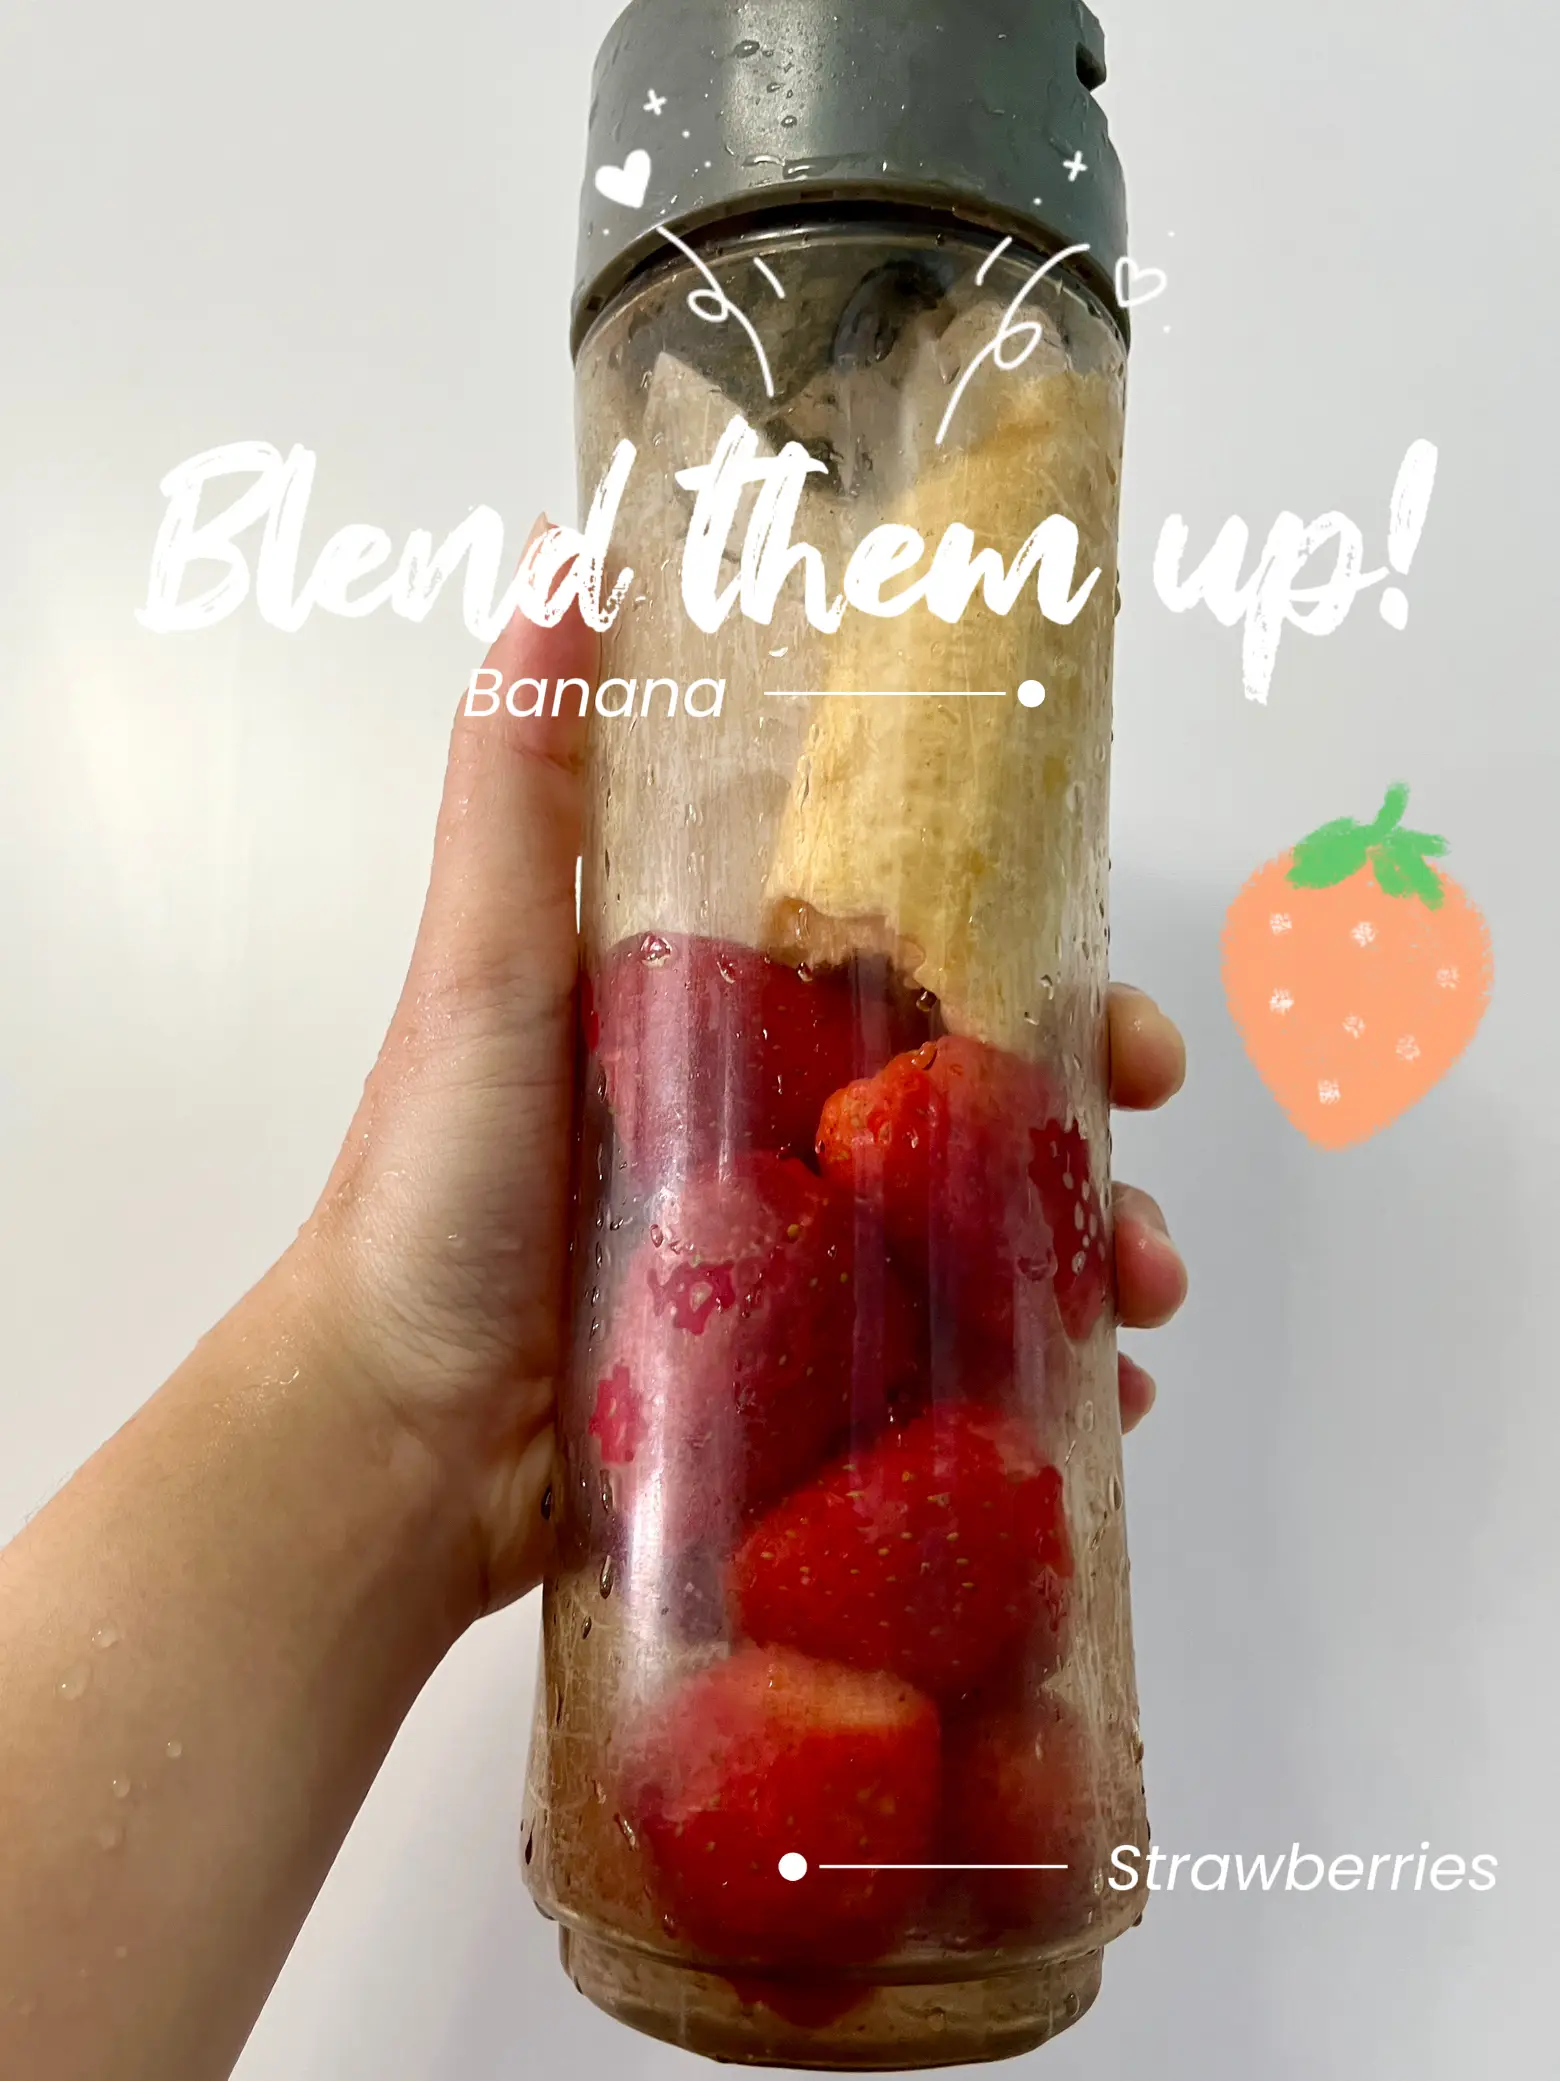 Making your own BOOST juice at home is super easy! Gallery posted by OurBTOhome 🏡 Lemon8